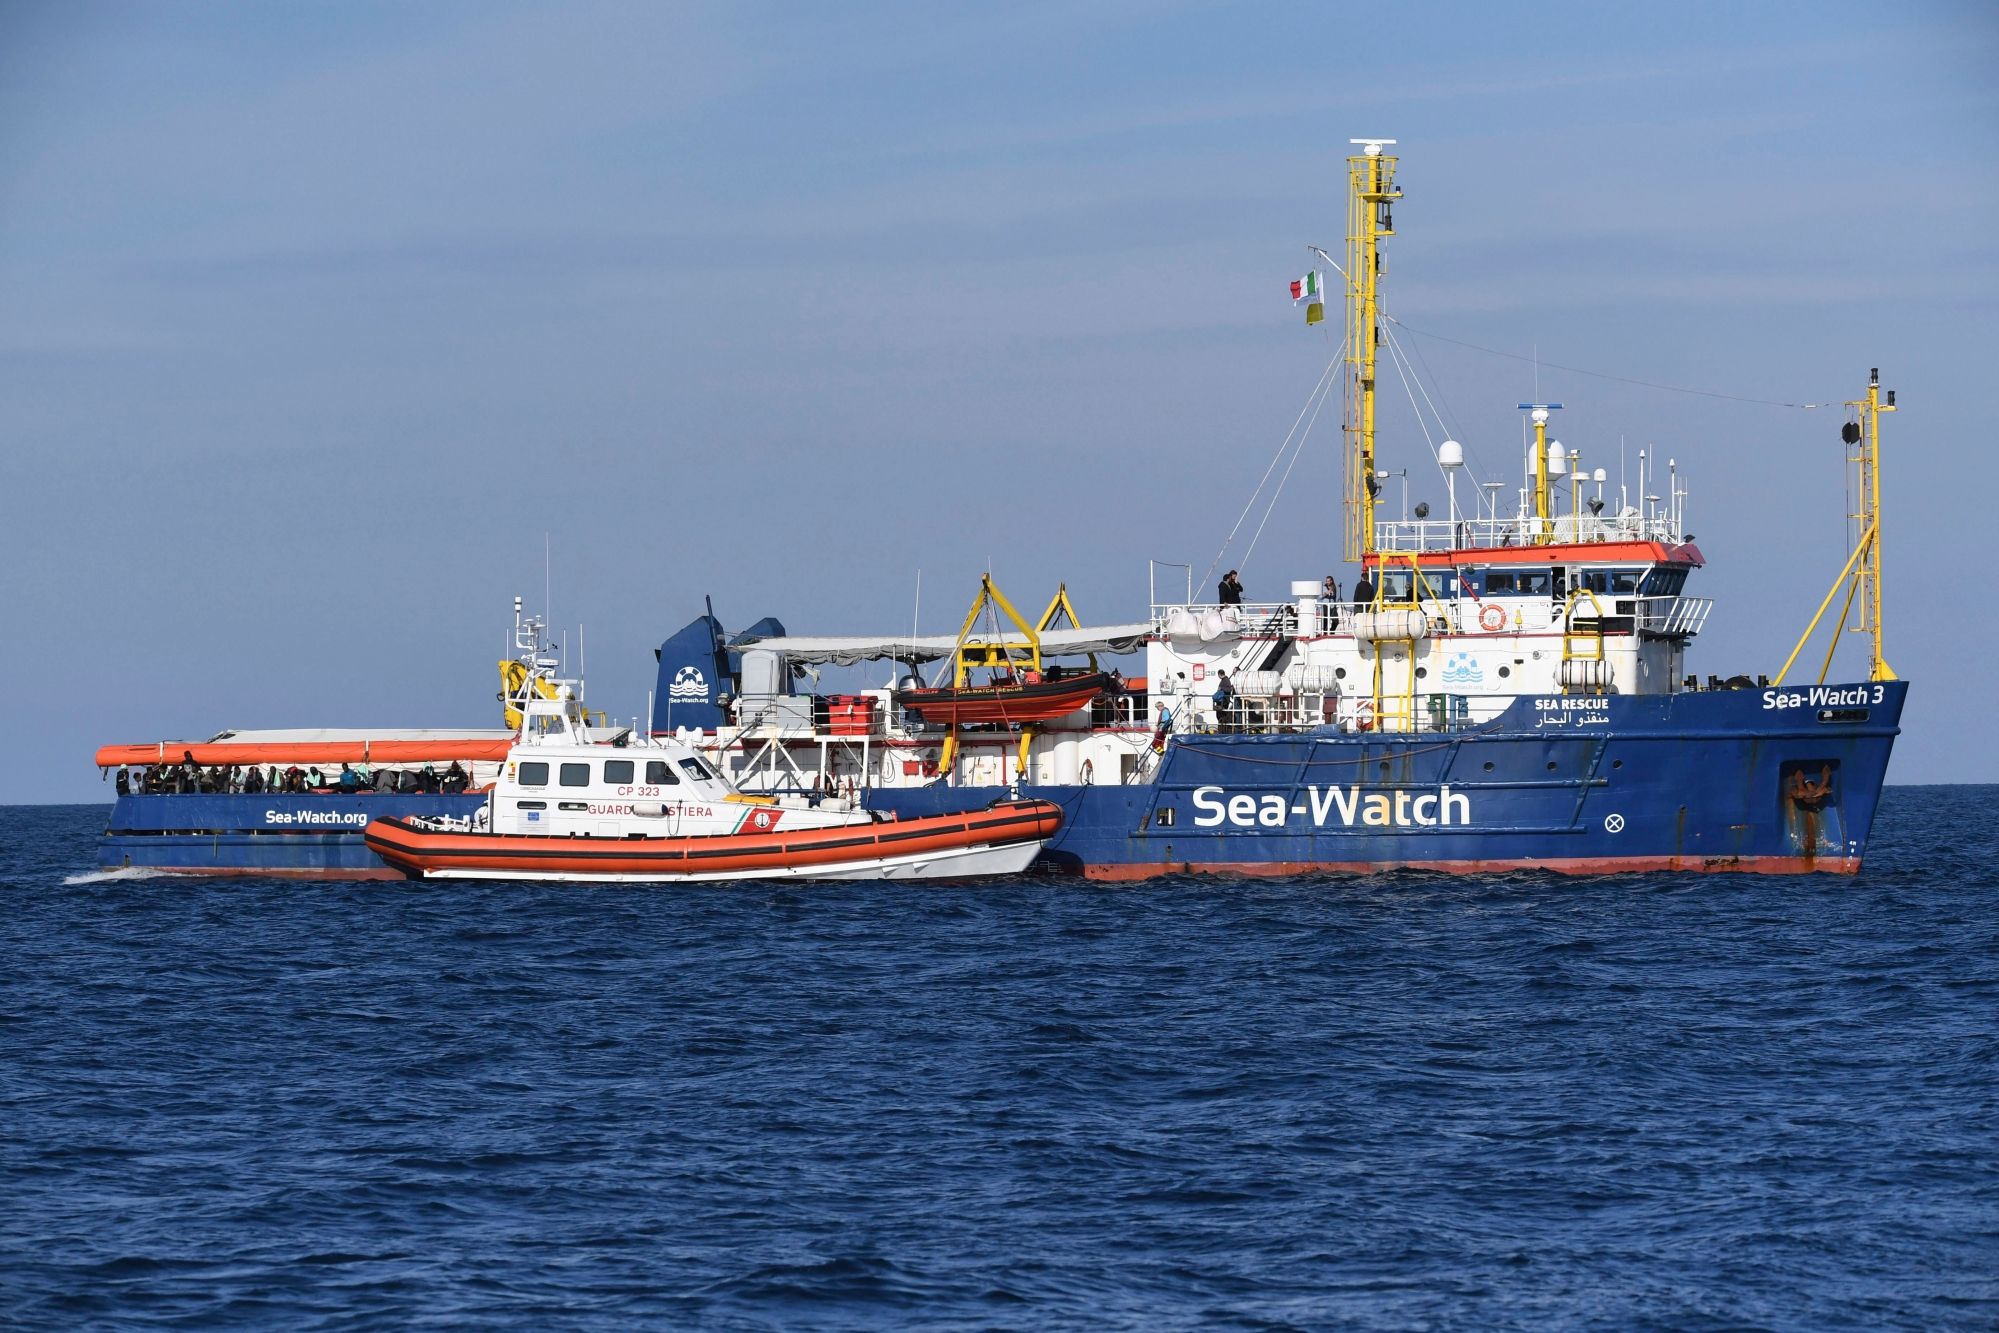 A coastguard boat approaches the German humanitarian group's rescue boat Sea Watch 3, to deliver food and blankets for the cold, off the coast of Syracuse, Italy, Sunday, Jan. 27, 2019. The Italian coast guard is bringing socks, shoes, bread and fruit to 47 migrants who have been stranded at sea for nine days aboard a German ship. (AP Photo/Salvatore Cavalli) Italy Europe Migrants